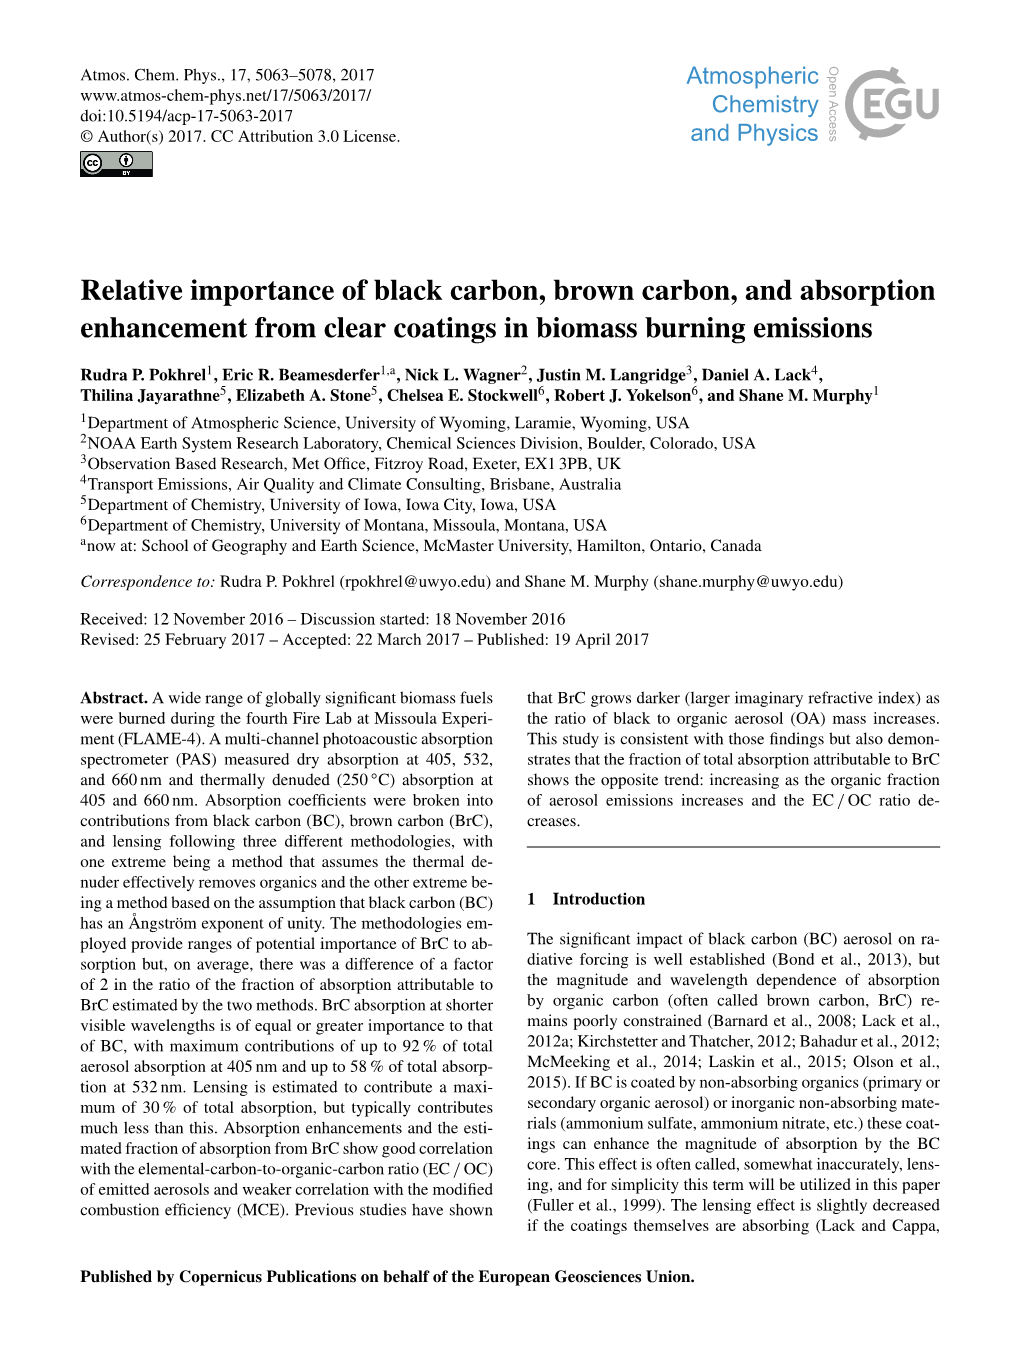 Relative Importance of Black Carbon, Brown Carbon, and Absorption Enhancement from Clear Coatings in Biomass Burning Emissions